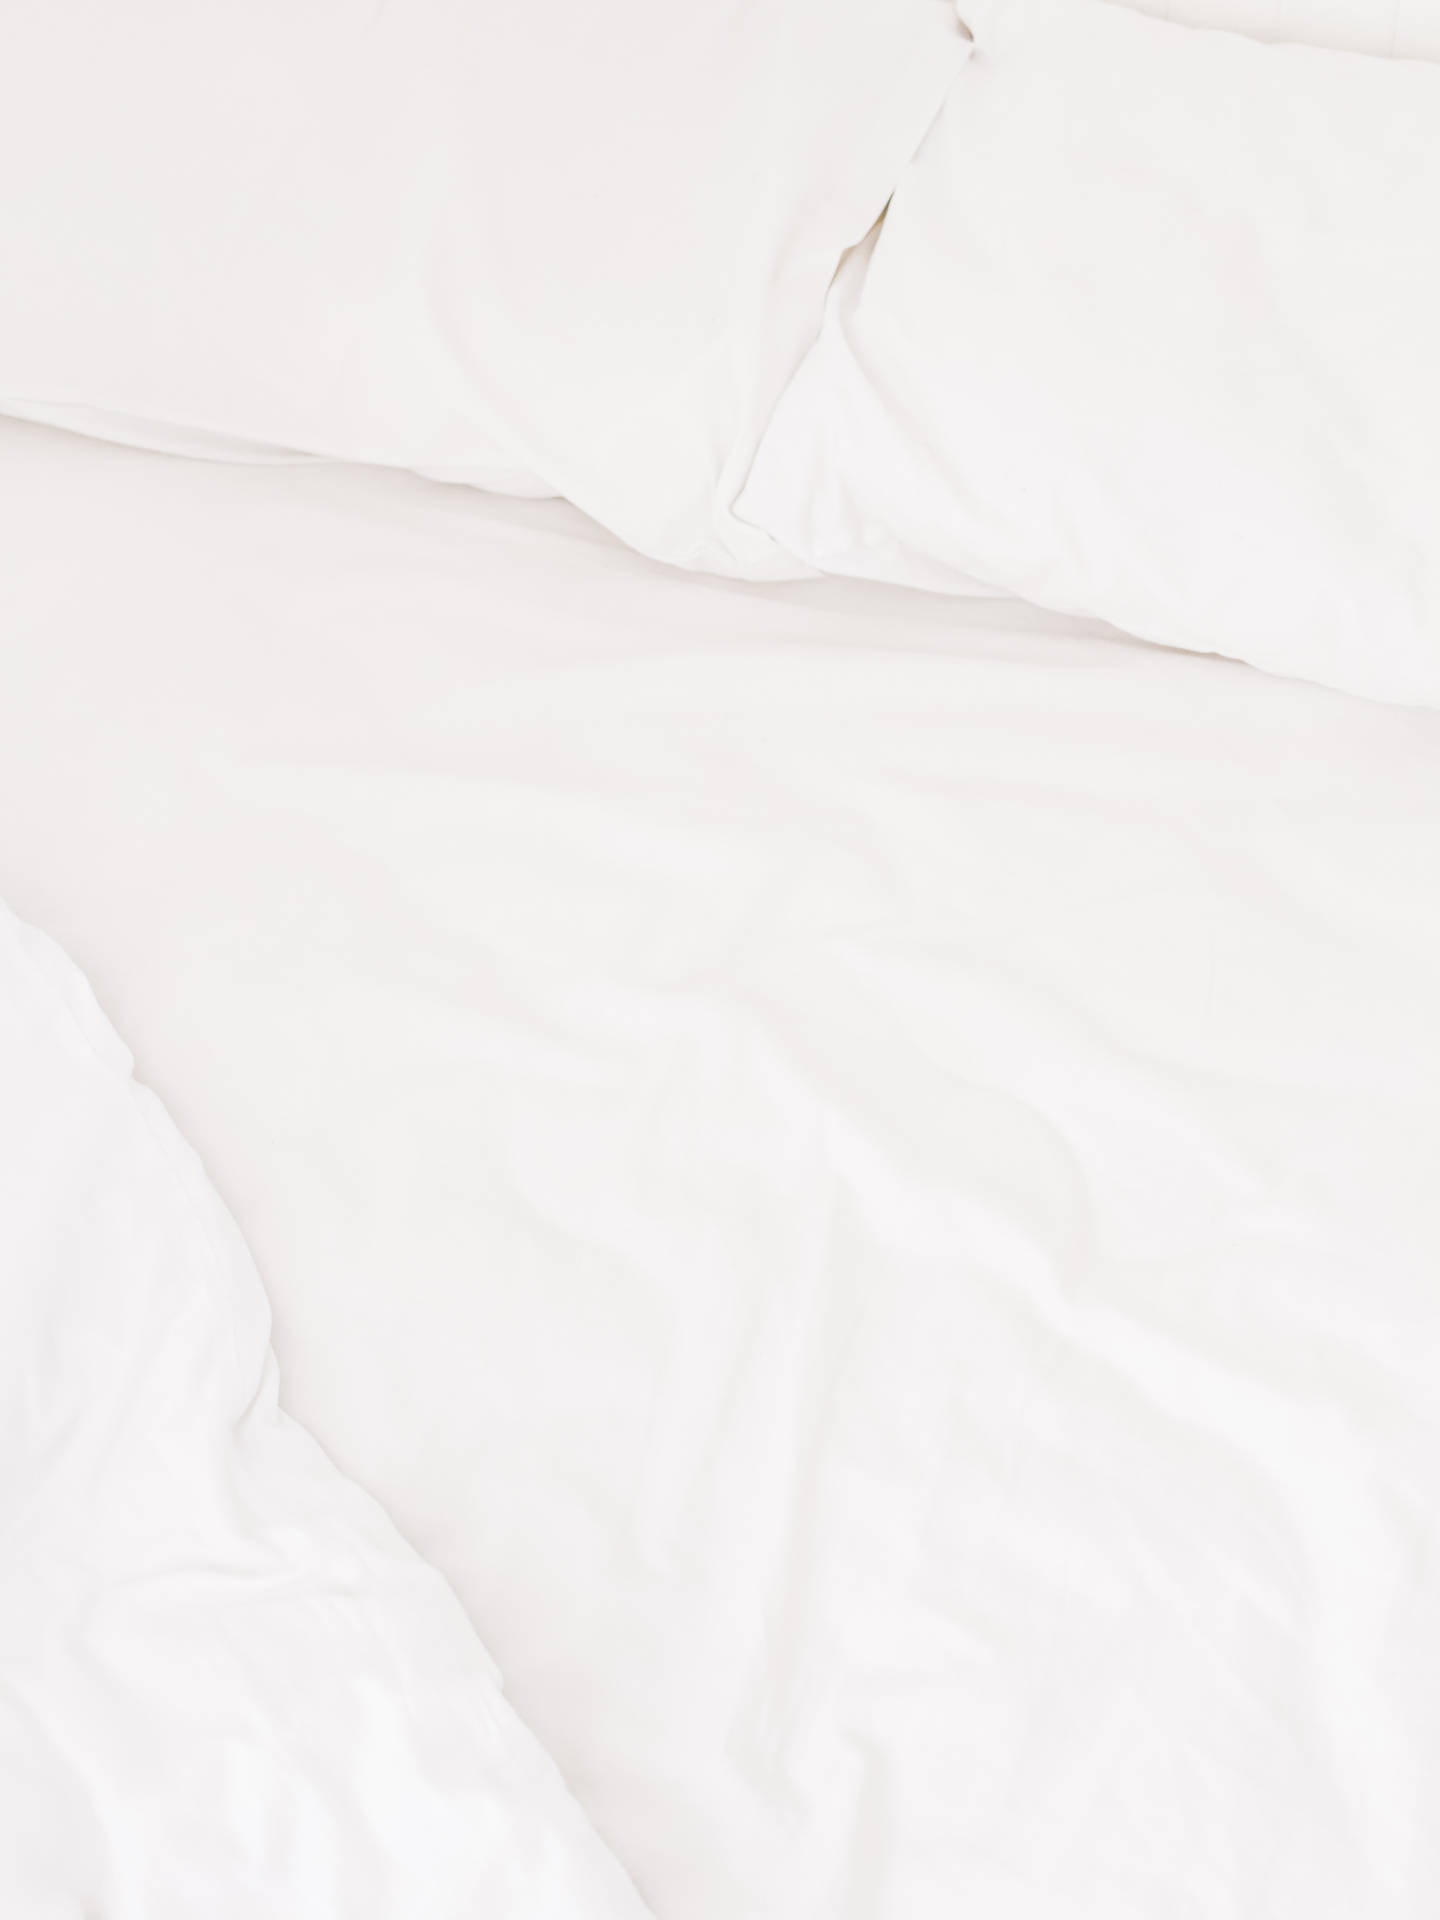 Simple White Aesthetic Empty Bed Background